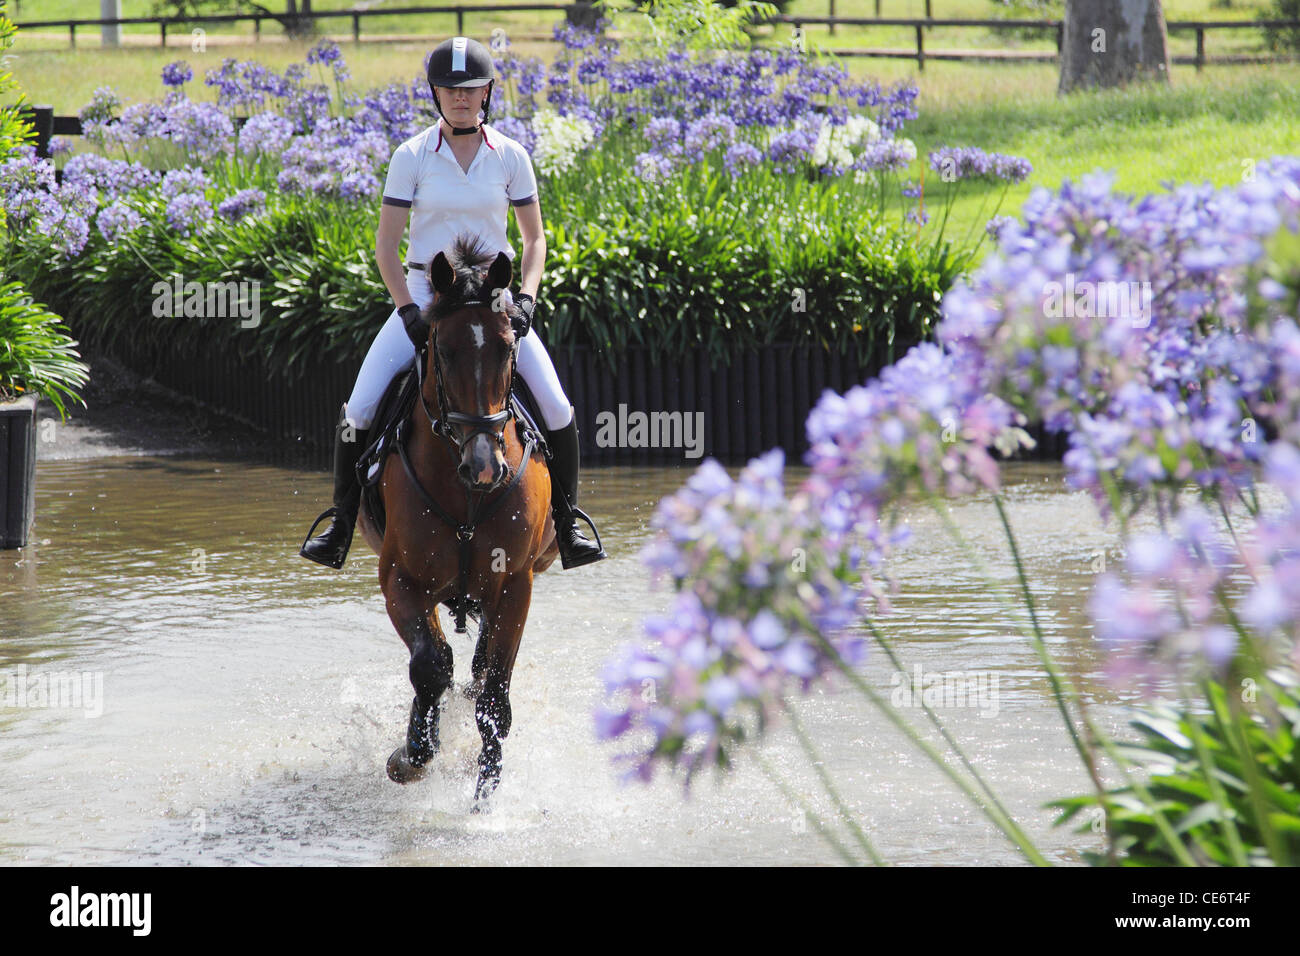 Horse Rider Crossing Water, Equestrian Event Stock Photo